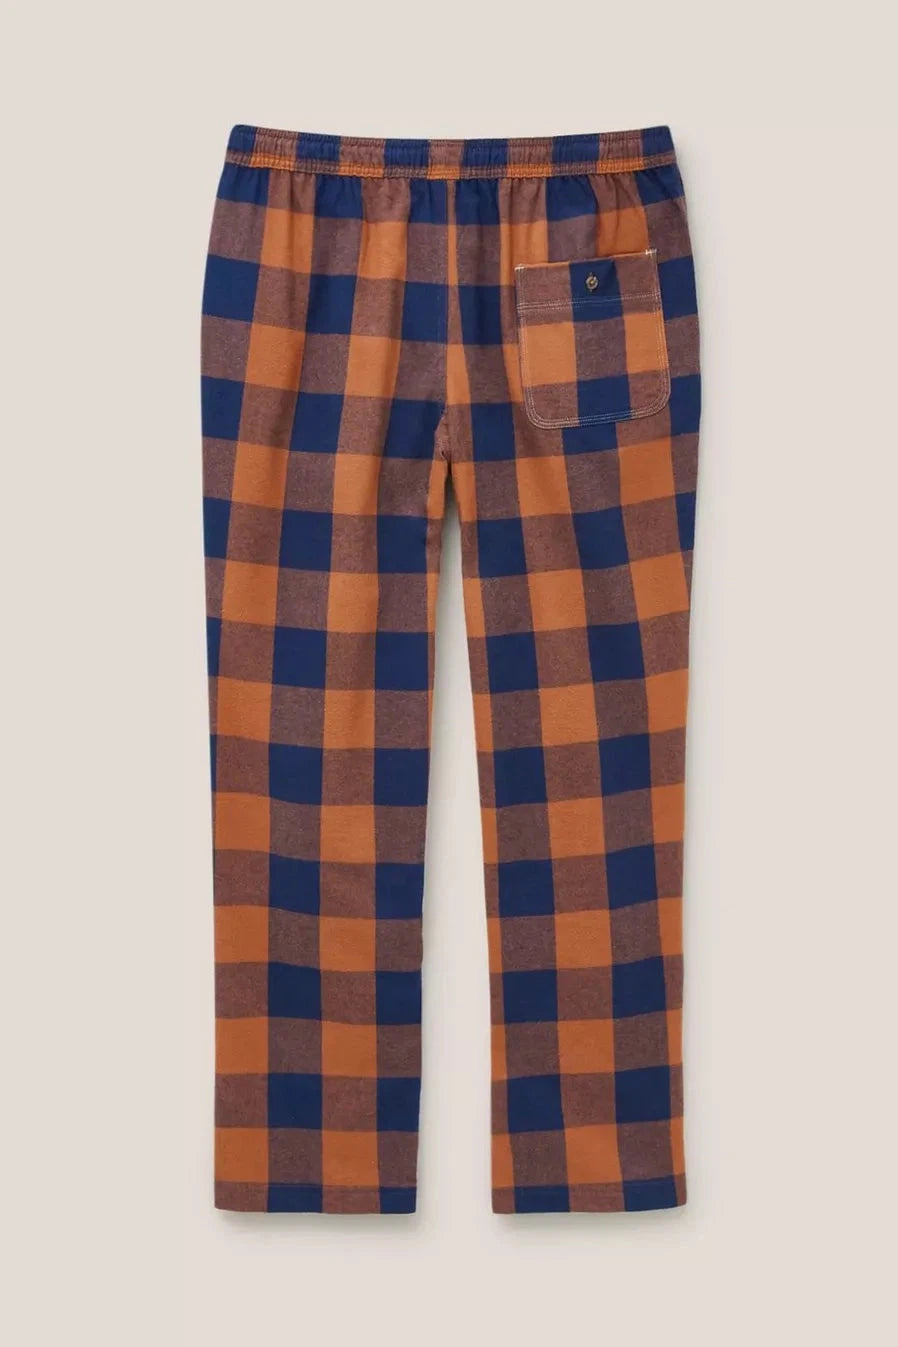 White Stuff Moorland Flannel PJ Trouser-Mens-Ohh! By Gum - Shop Sustainable